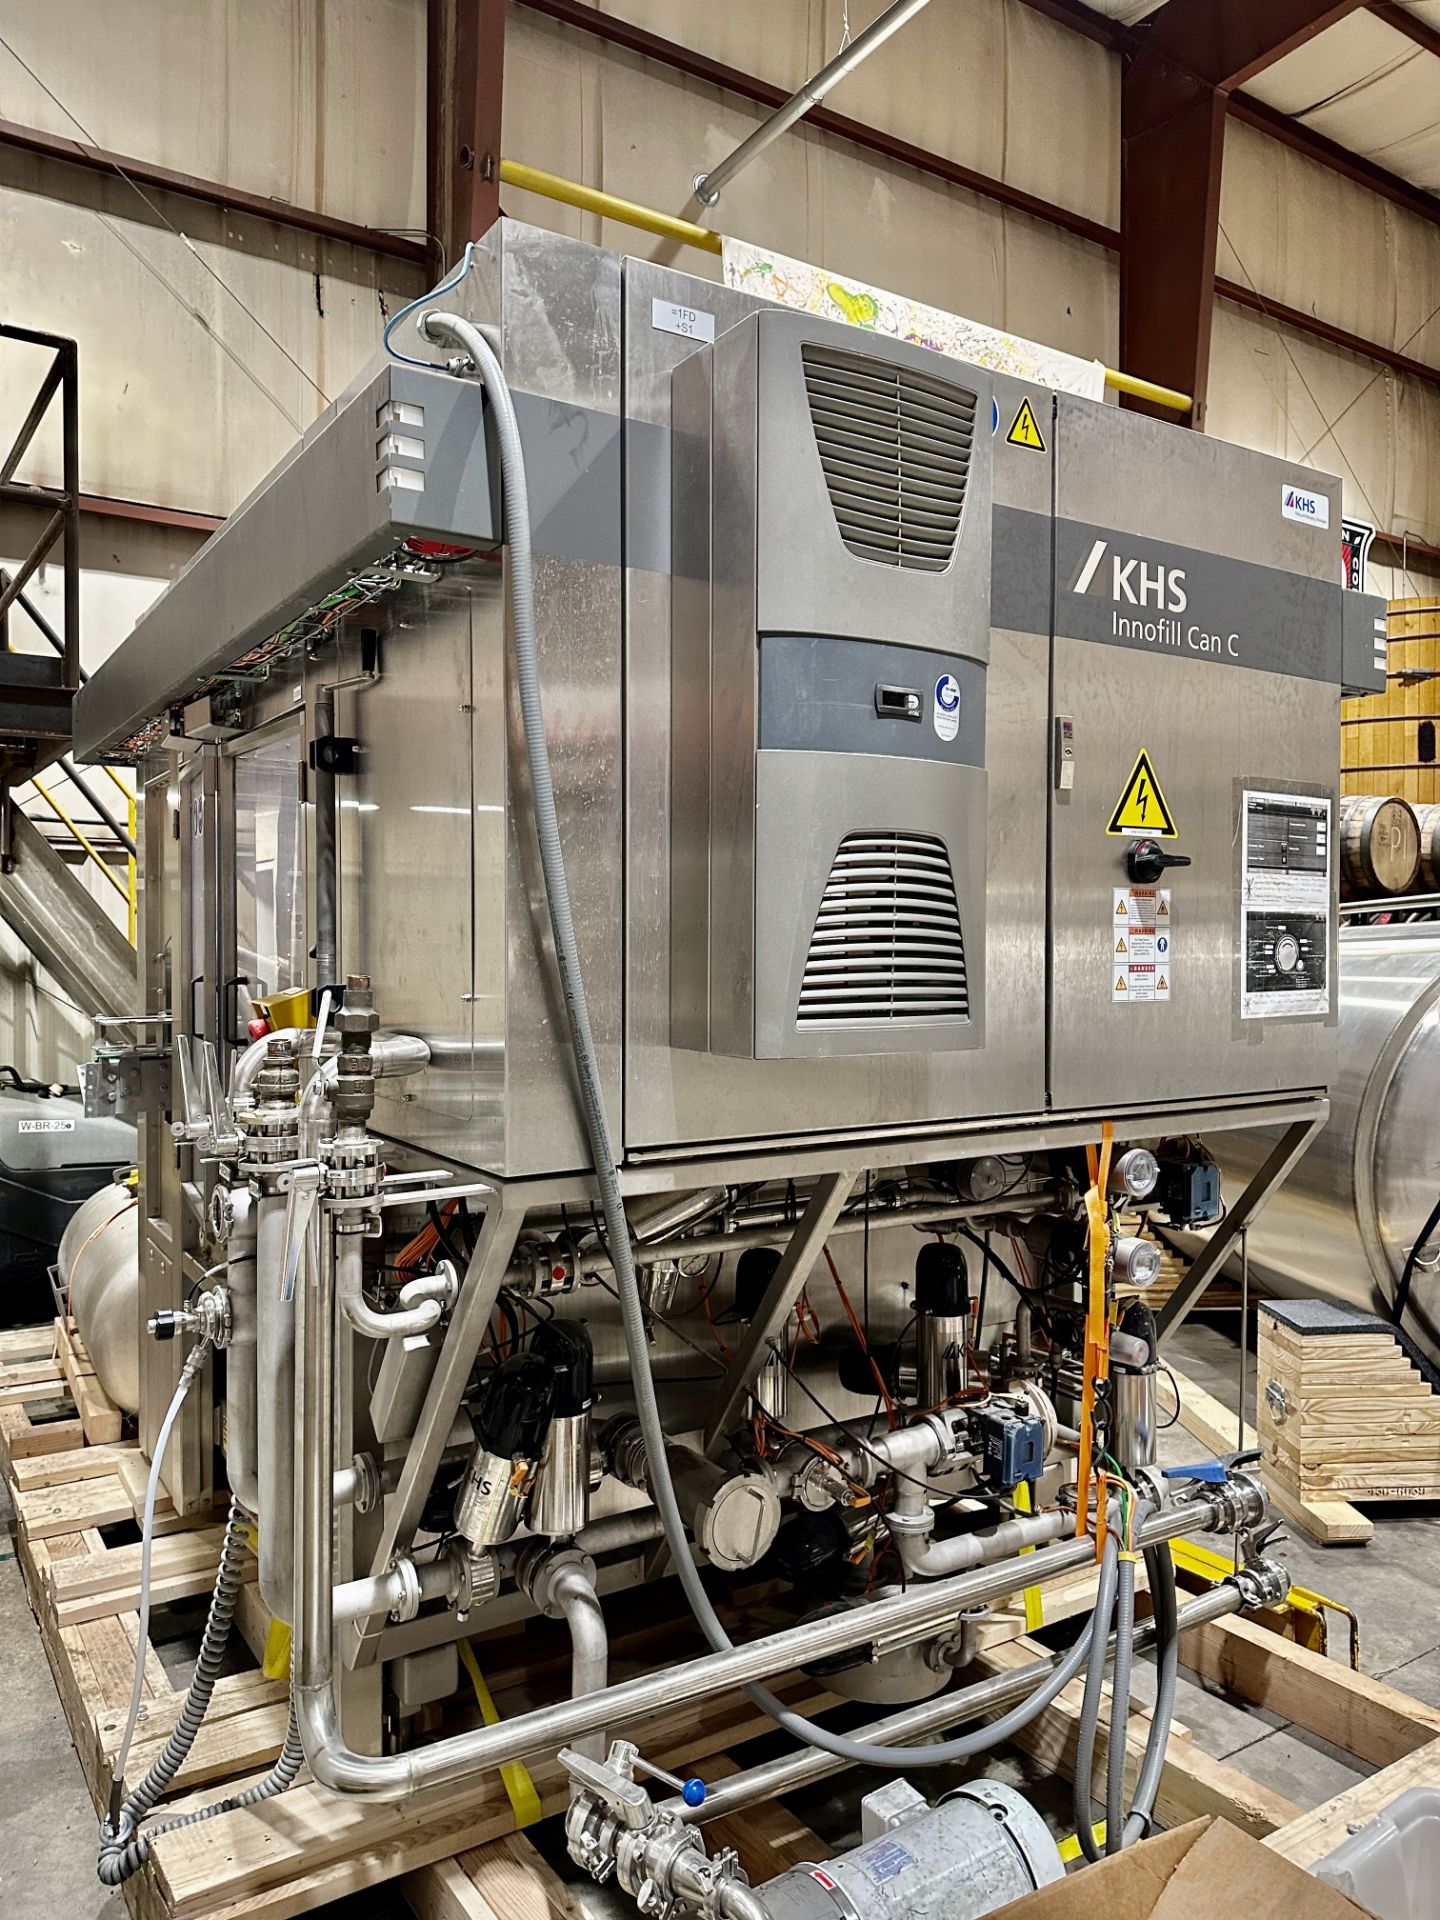 2019 KHS Innofill Can C Micro 18-Head Can Filler & 4-Head Seamer, Set for Sleek Can | Rig Fee $1840 - Image 5 of 21